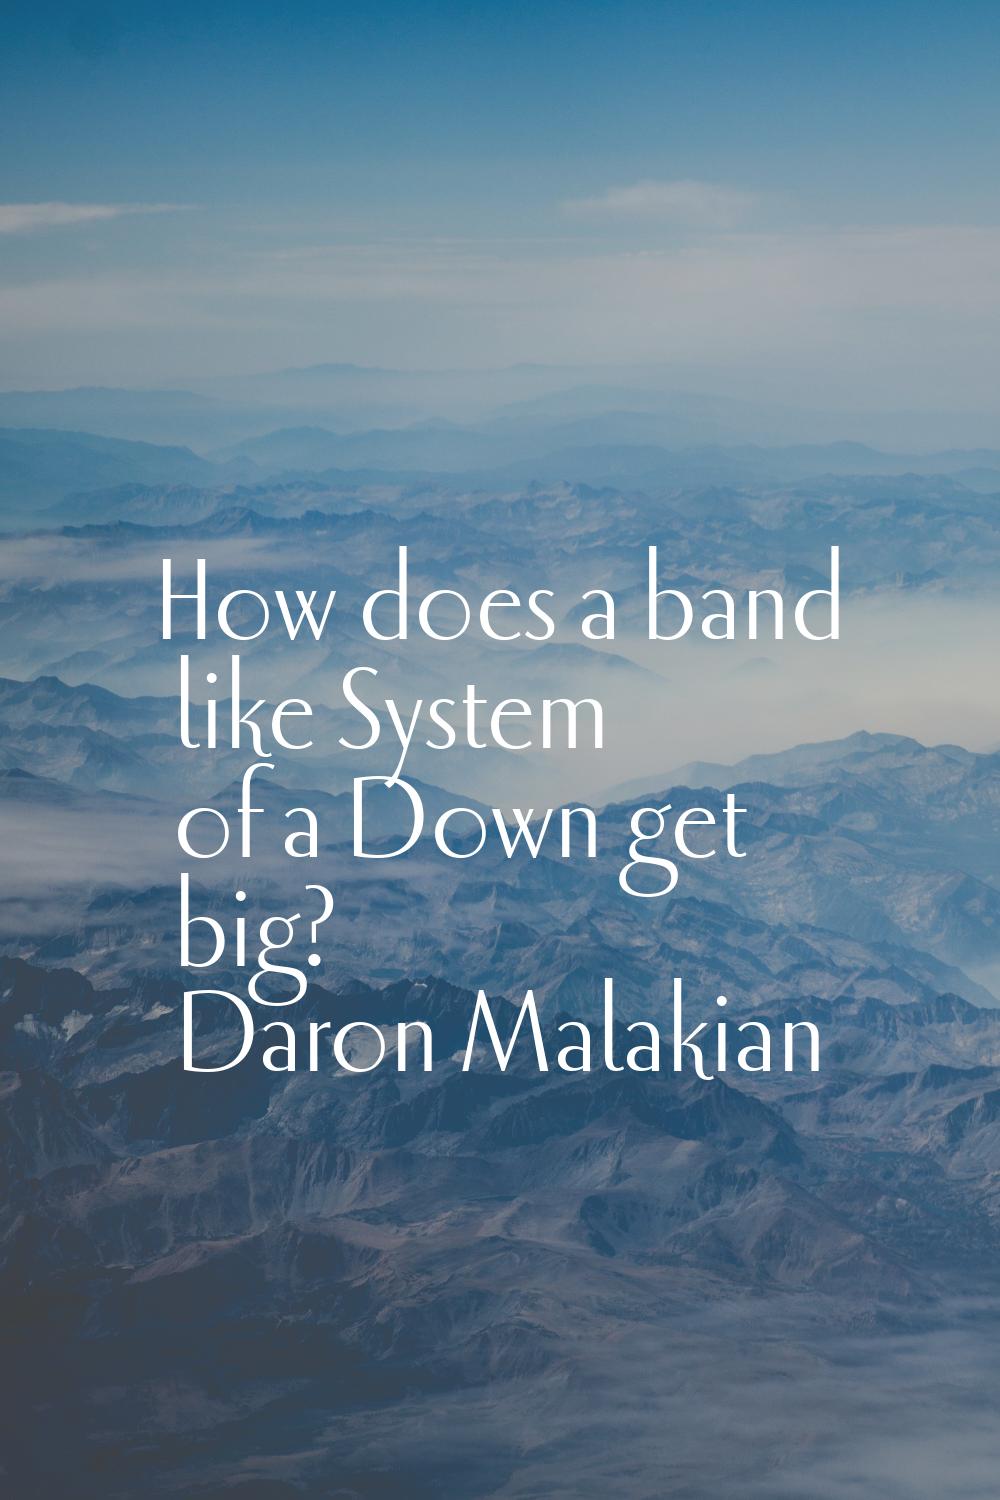 How does a band like System of a Down get big?